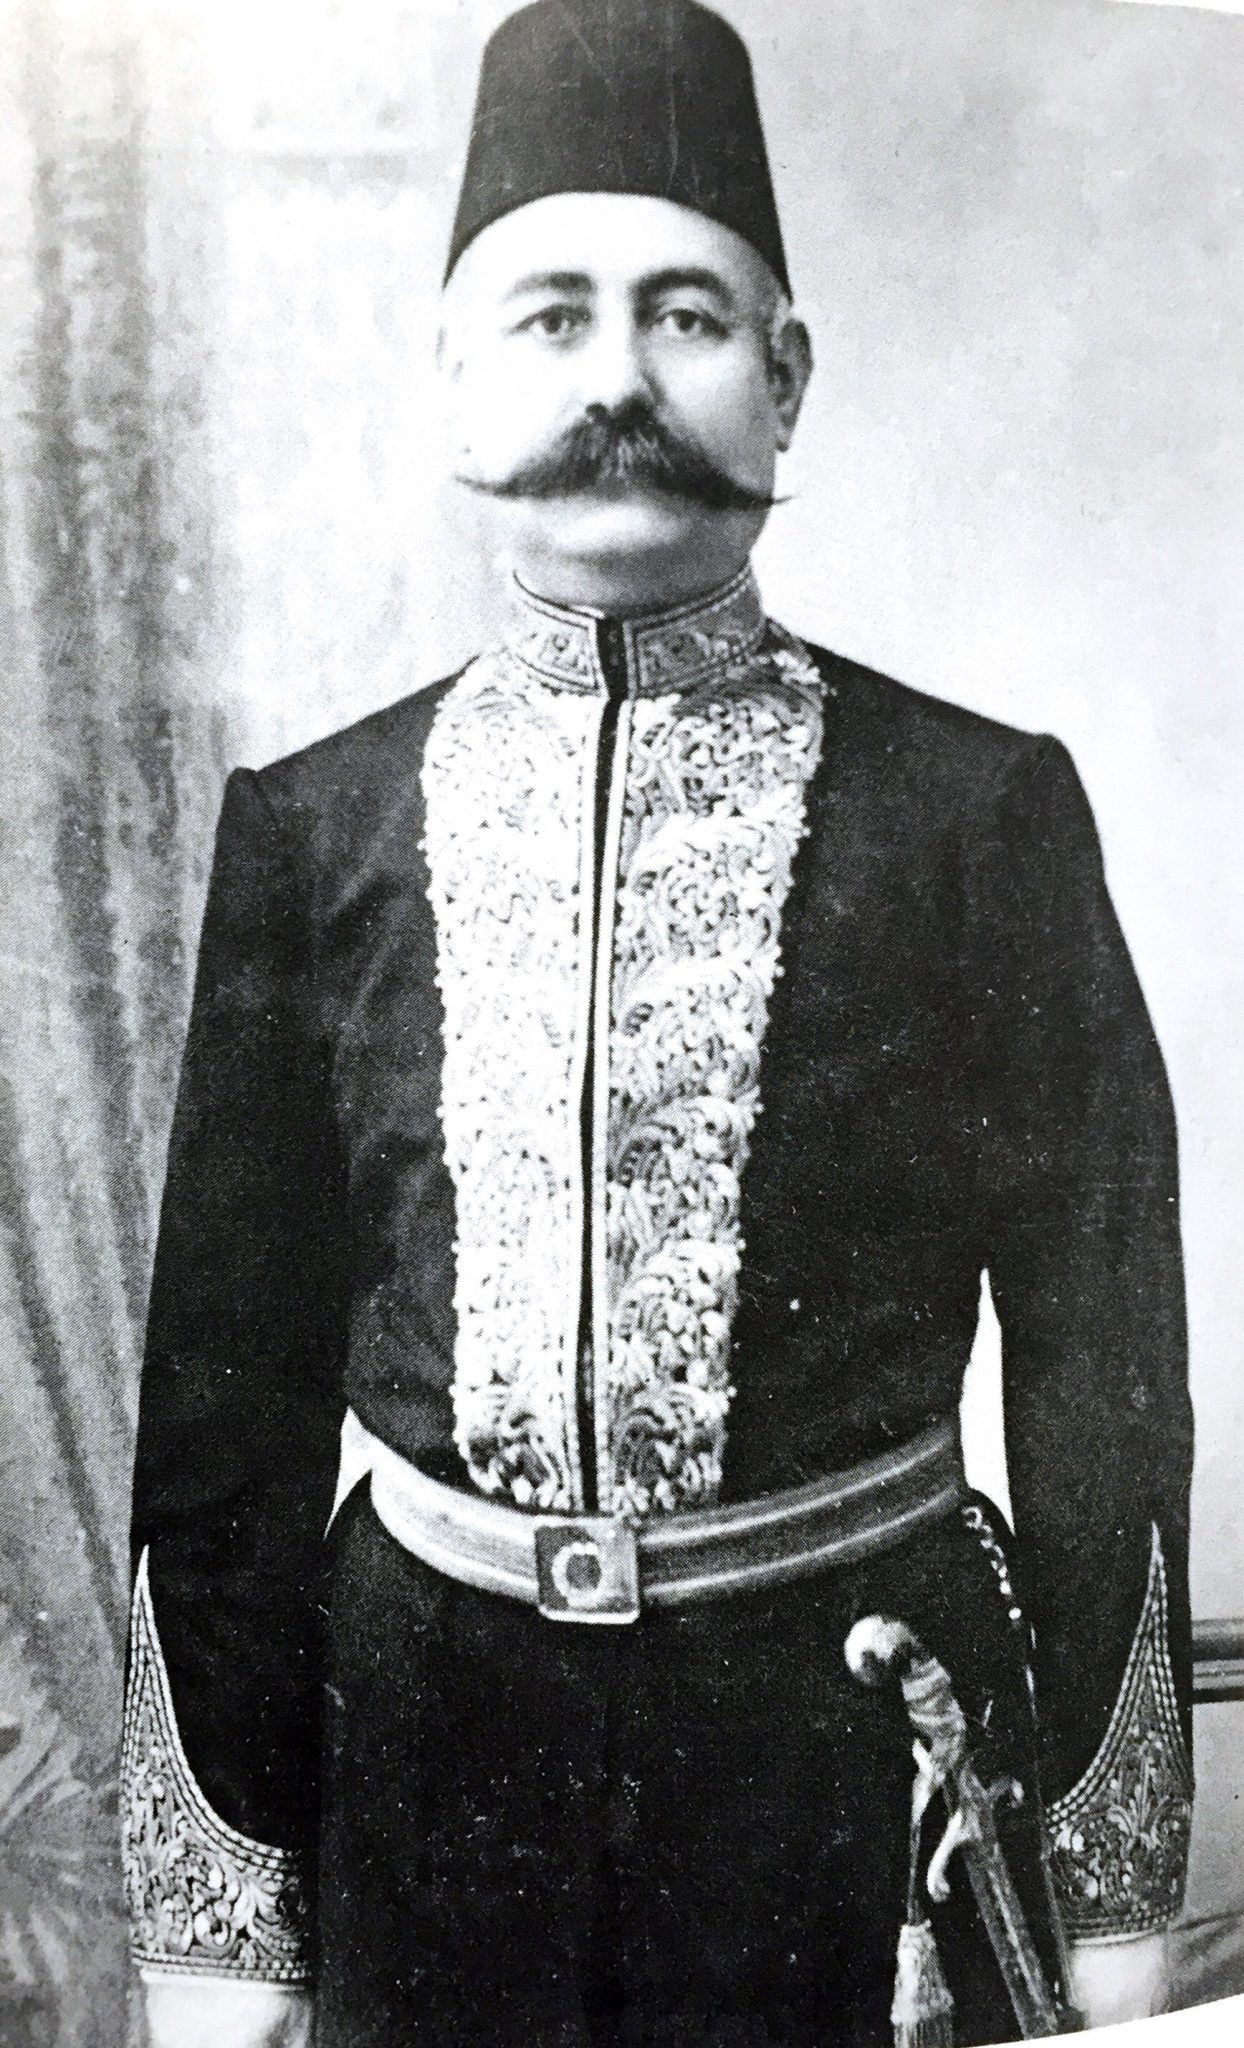 Tavit Effendi Ourfalian, the president of the Armenian National Council of Adana and one of the first victims of the massacres (Photo: Mekhitarist Order, San Lazzaro, Venice, Italy)